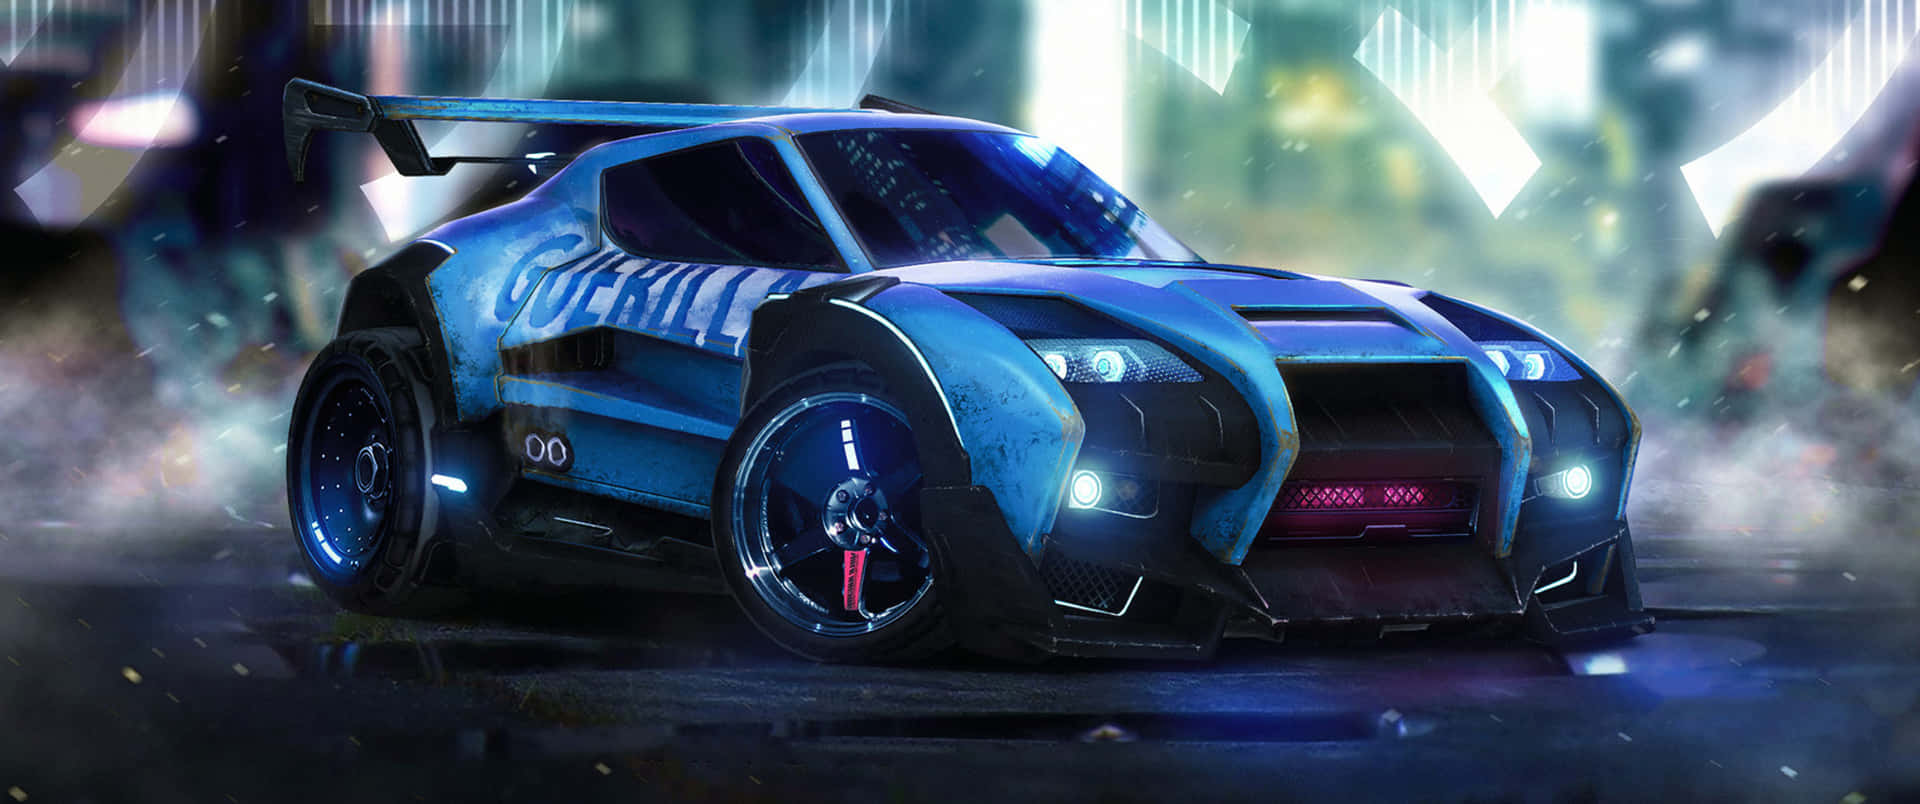 Feel the thrill of driving at high speeds with Rocket League